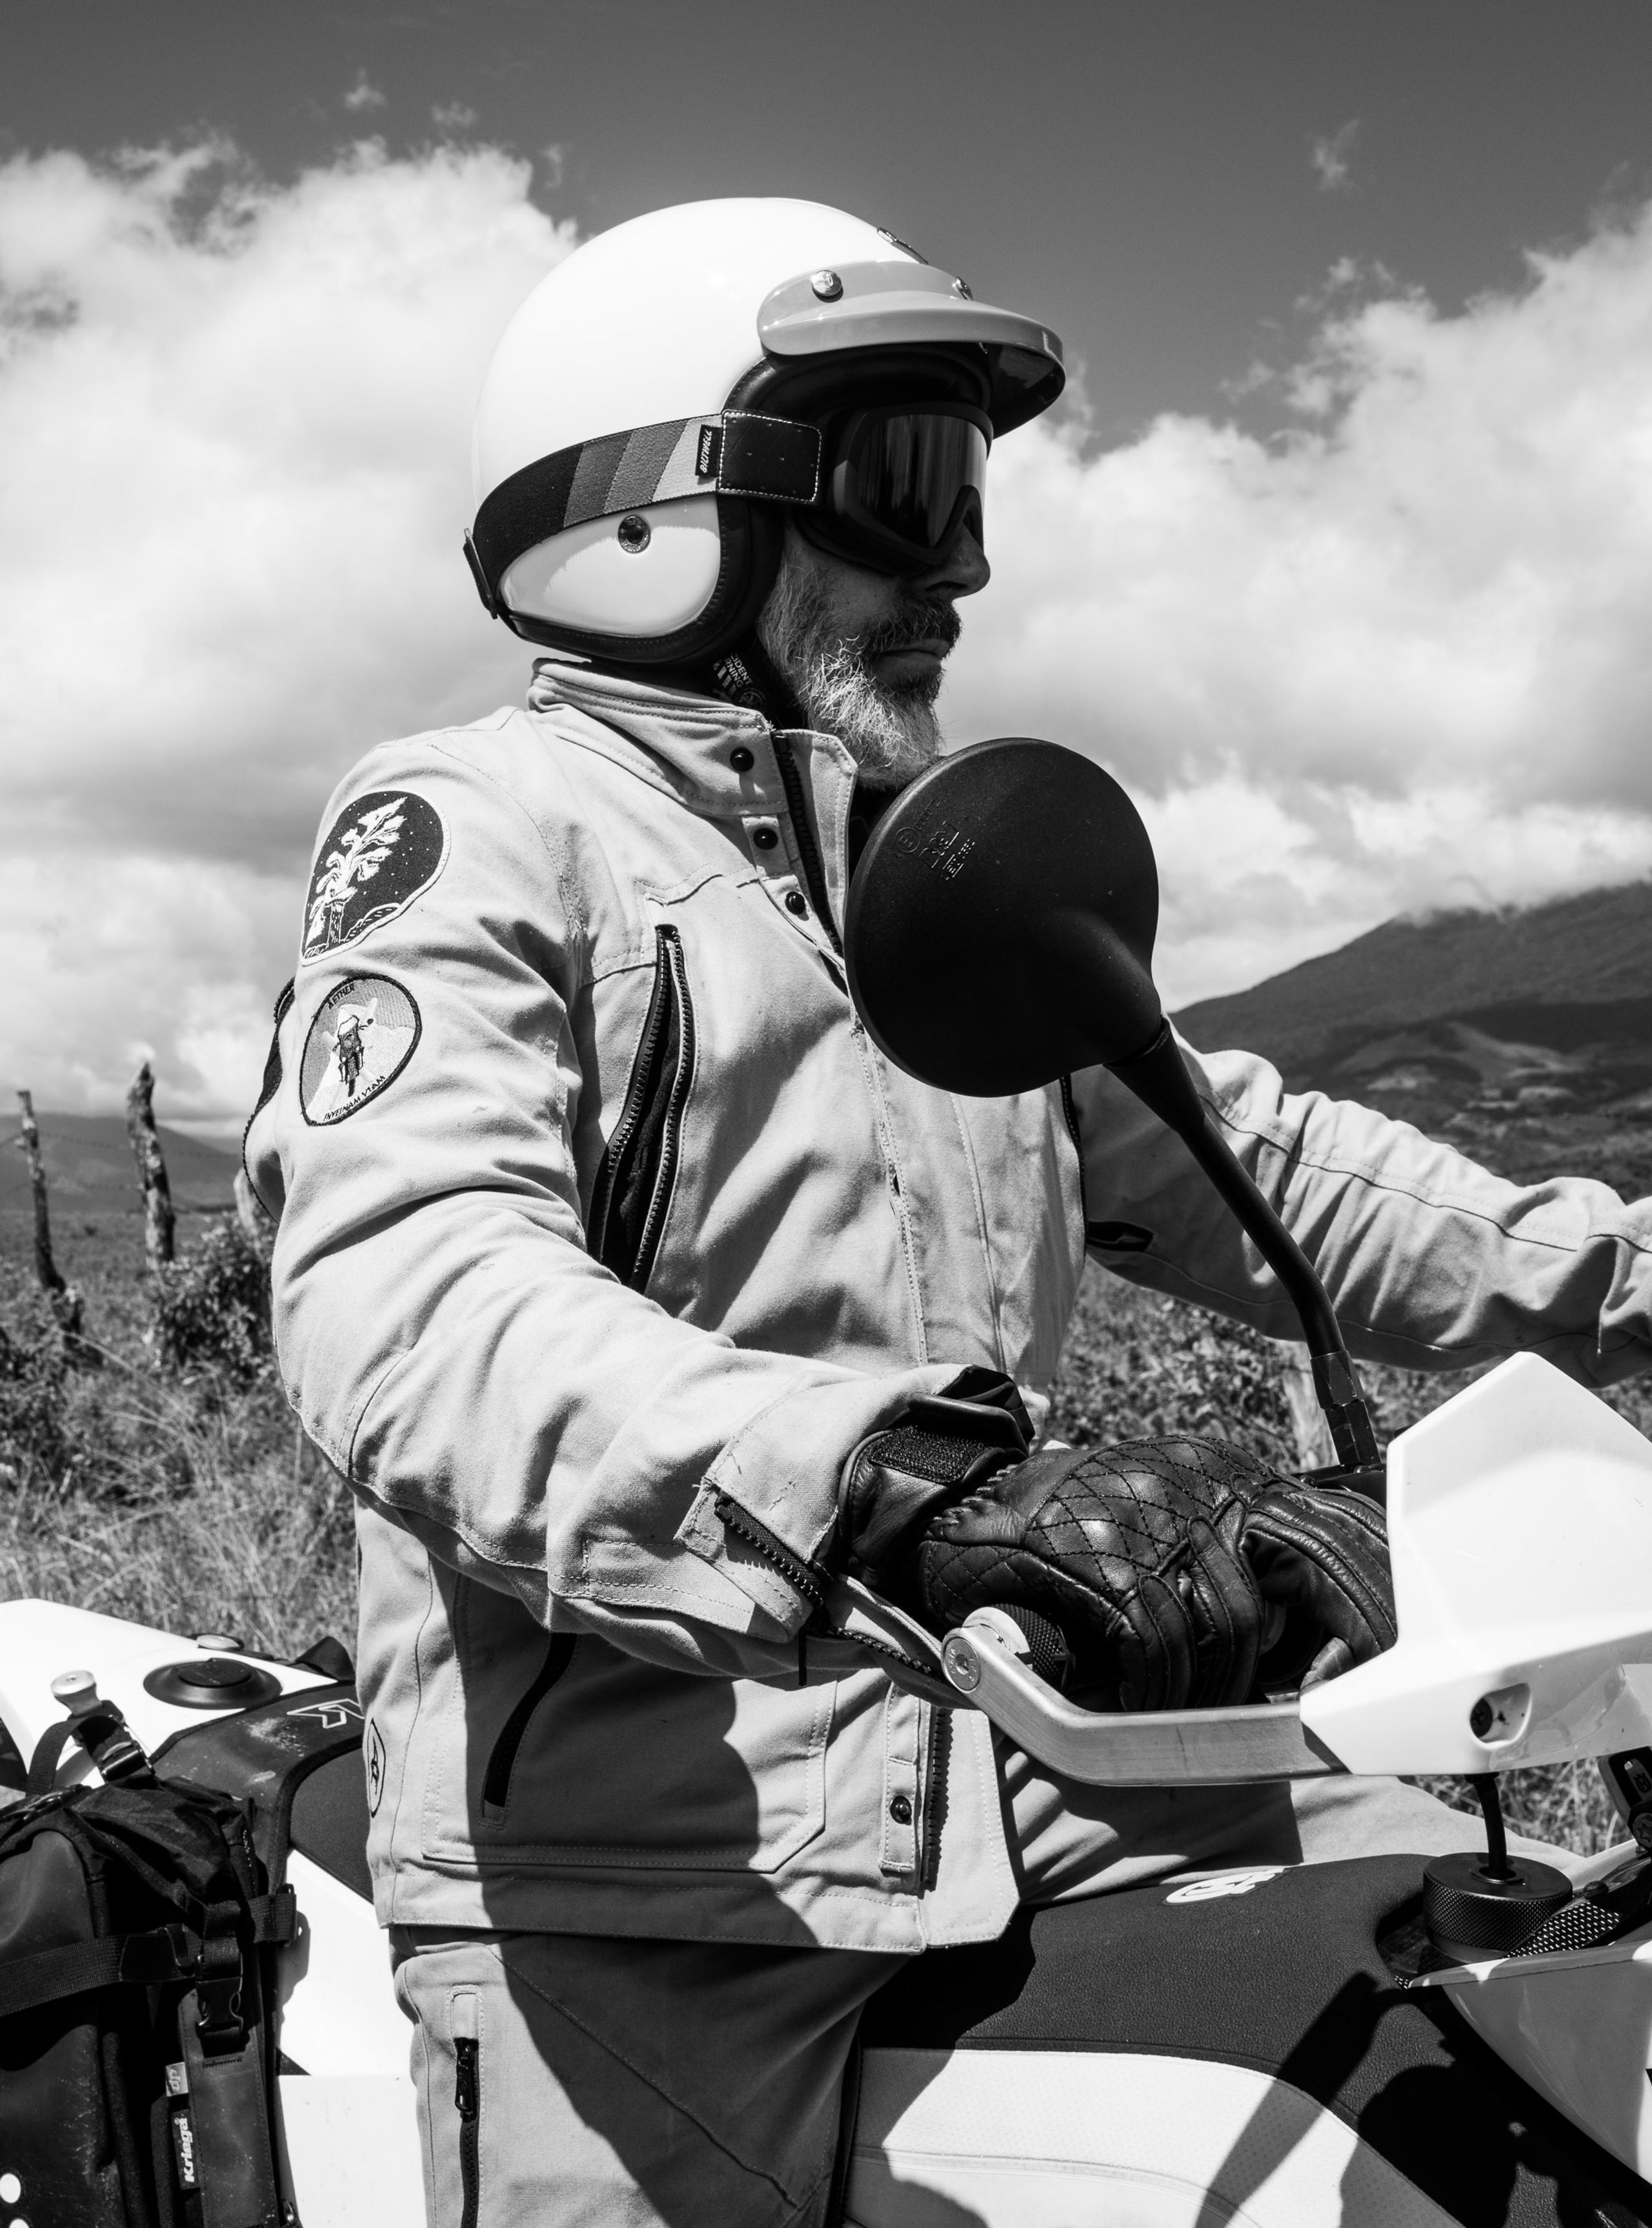 Black and white photo of man riding motorcycle in Costa Rica countryside